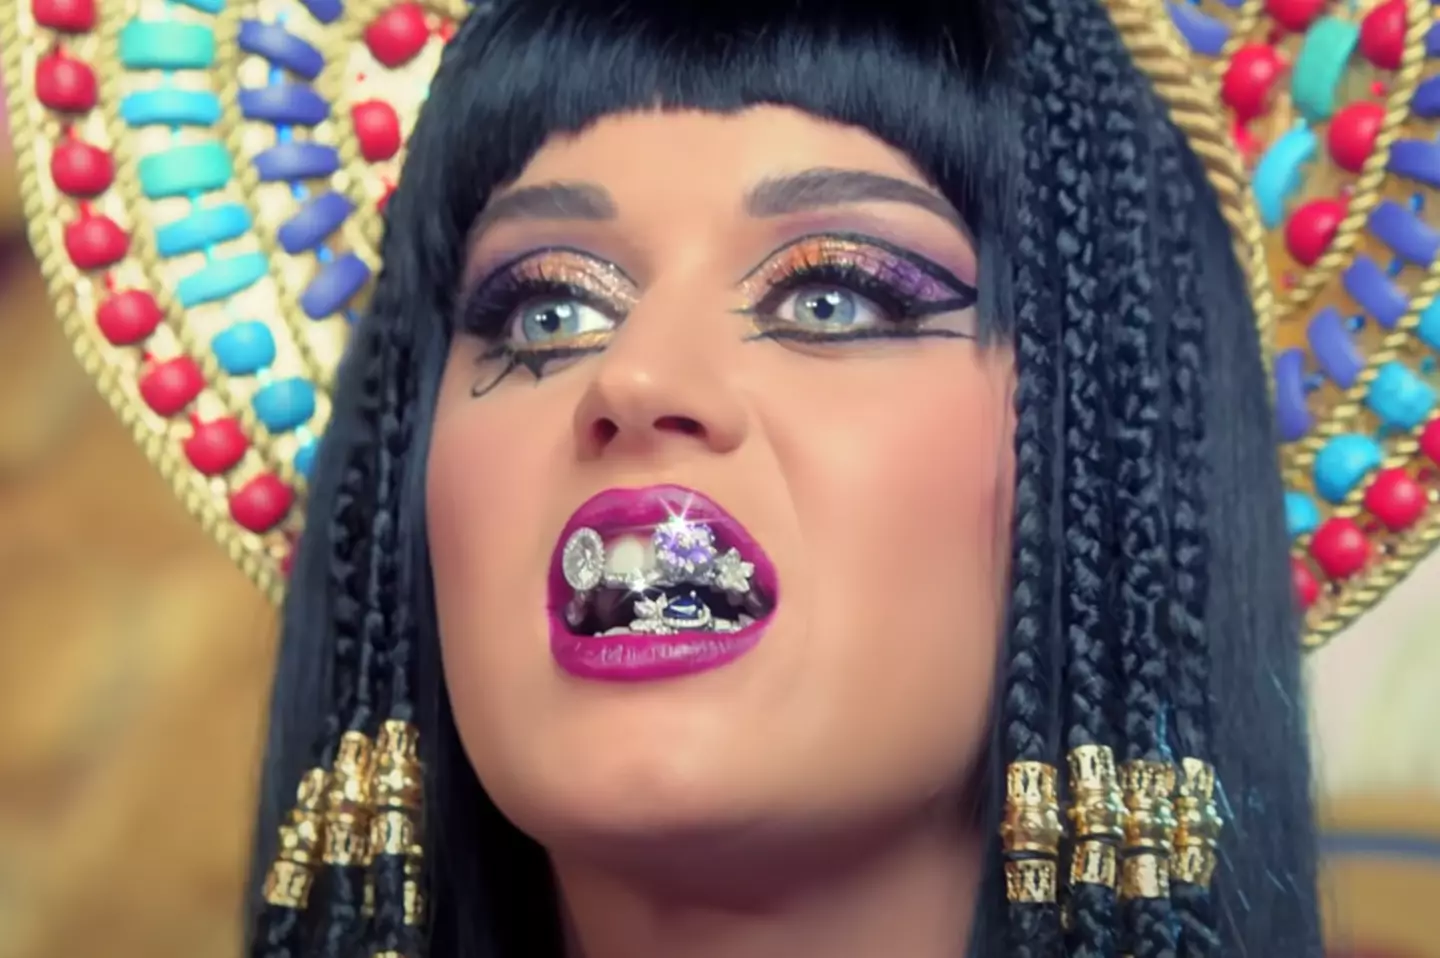 Katy Perry is being called out on social media for the lyrics of her 2013 release 'Dark Horse'.